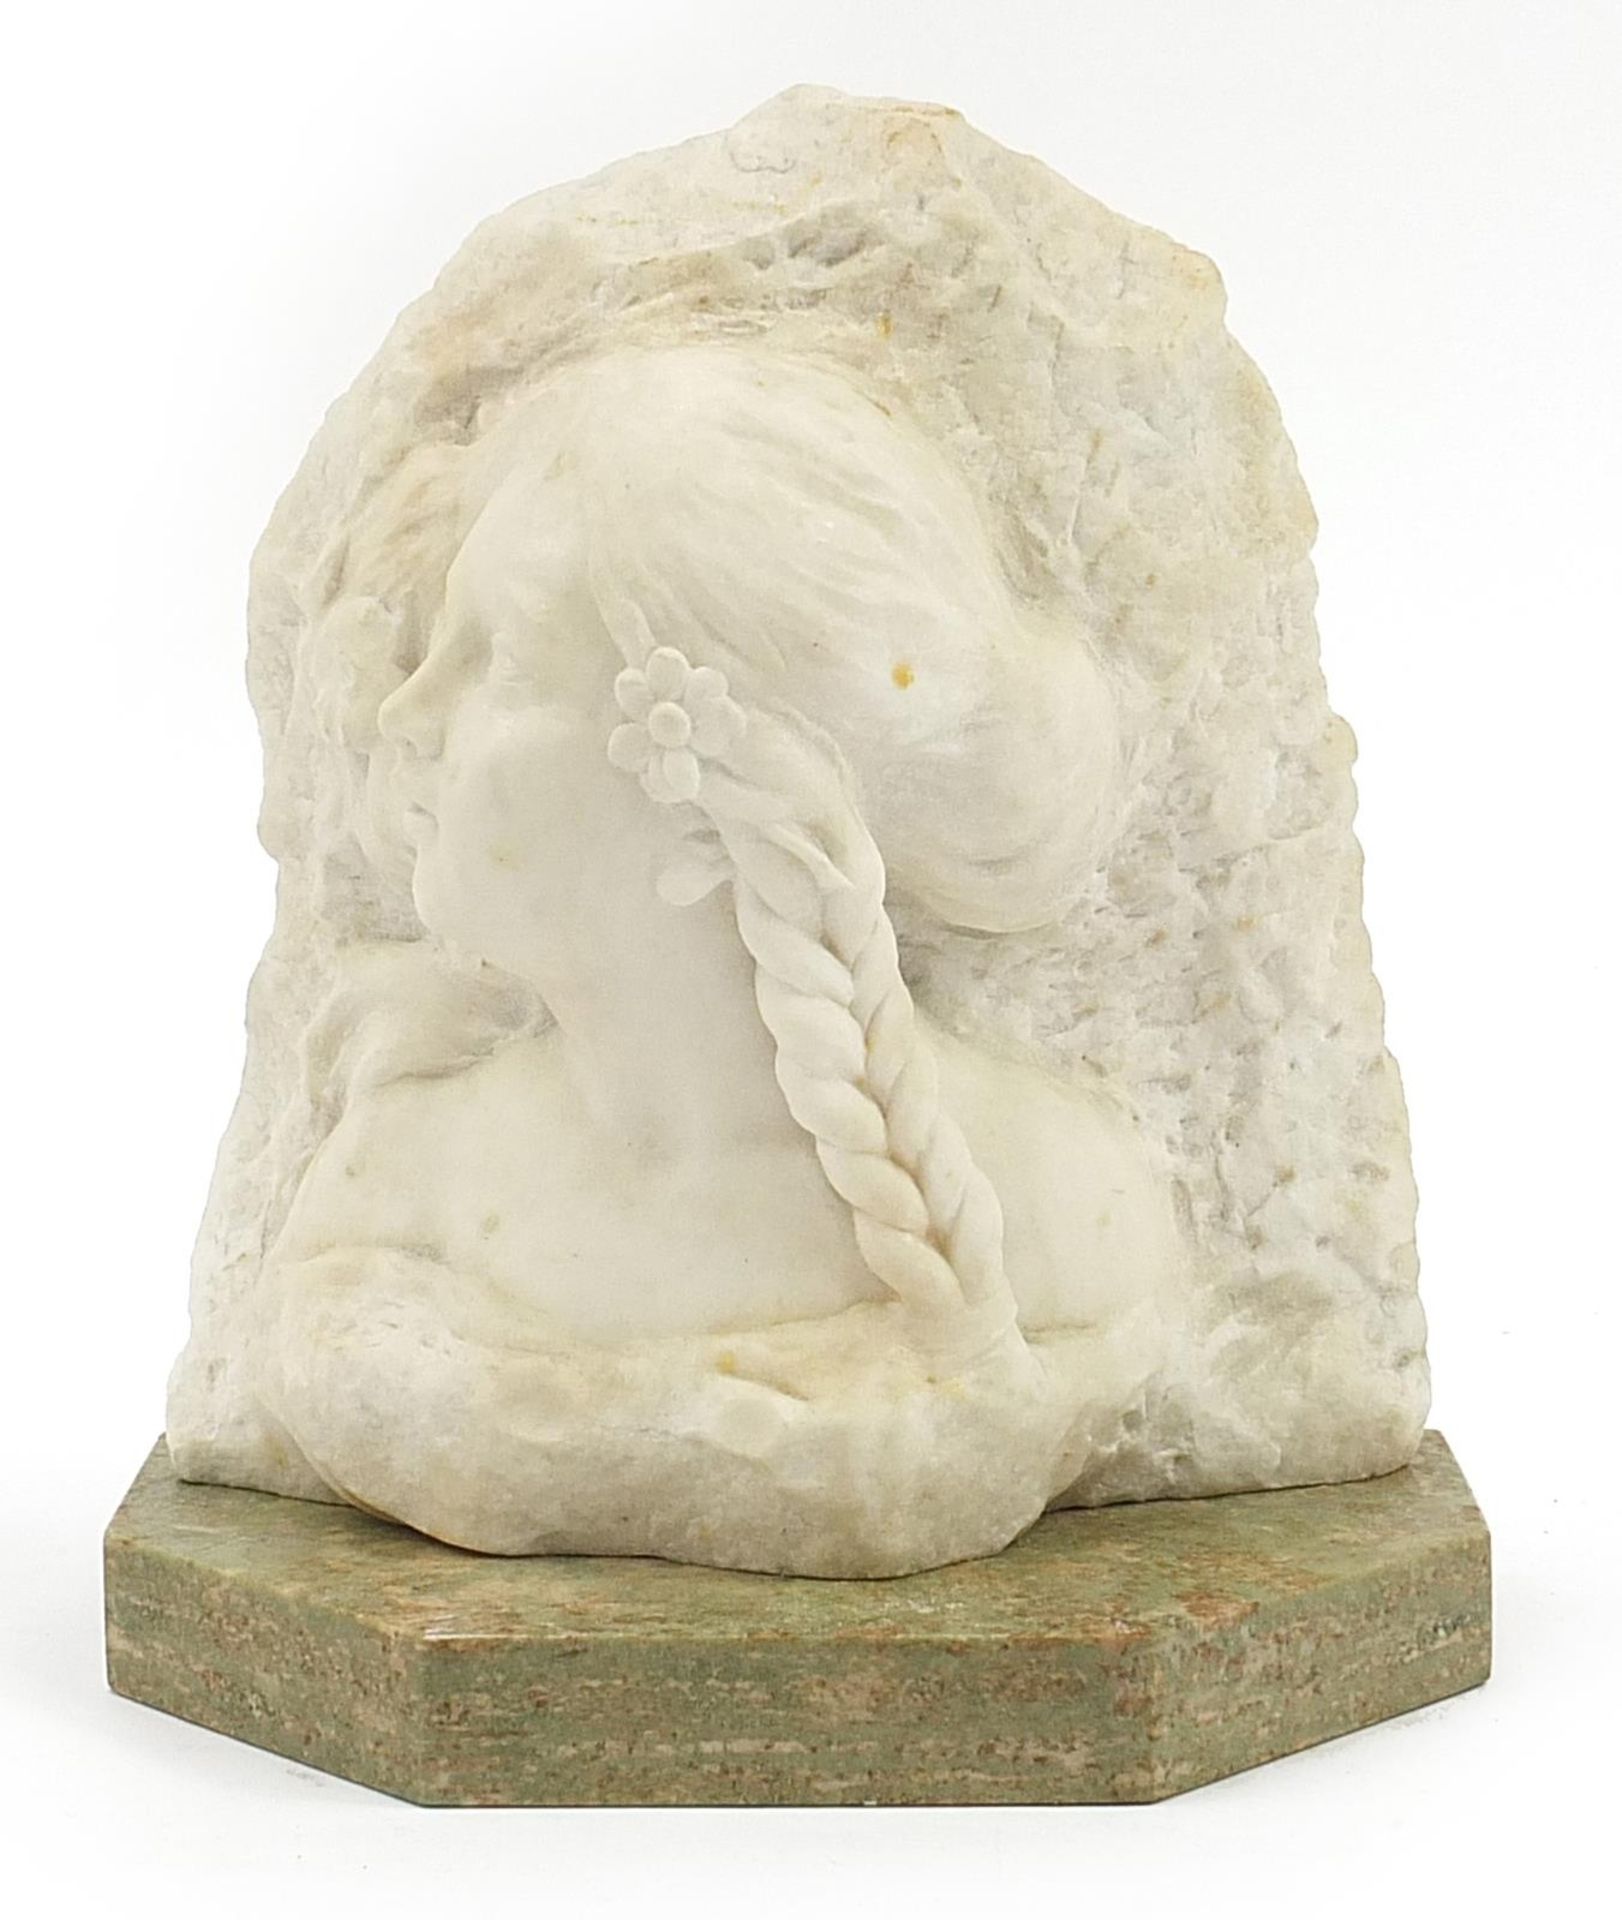 19th century alabaster carving of a young female raised on a green marble base with canted